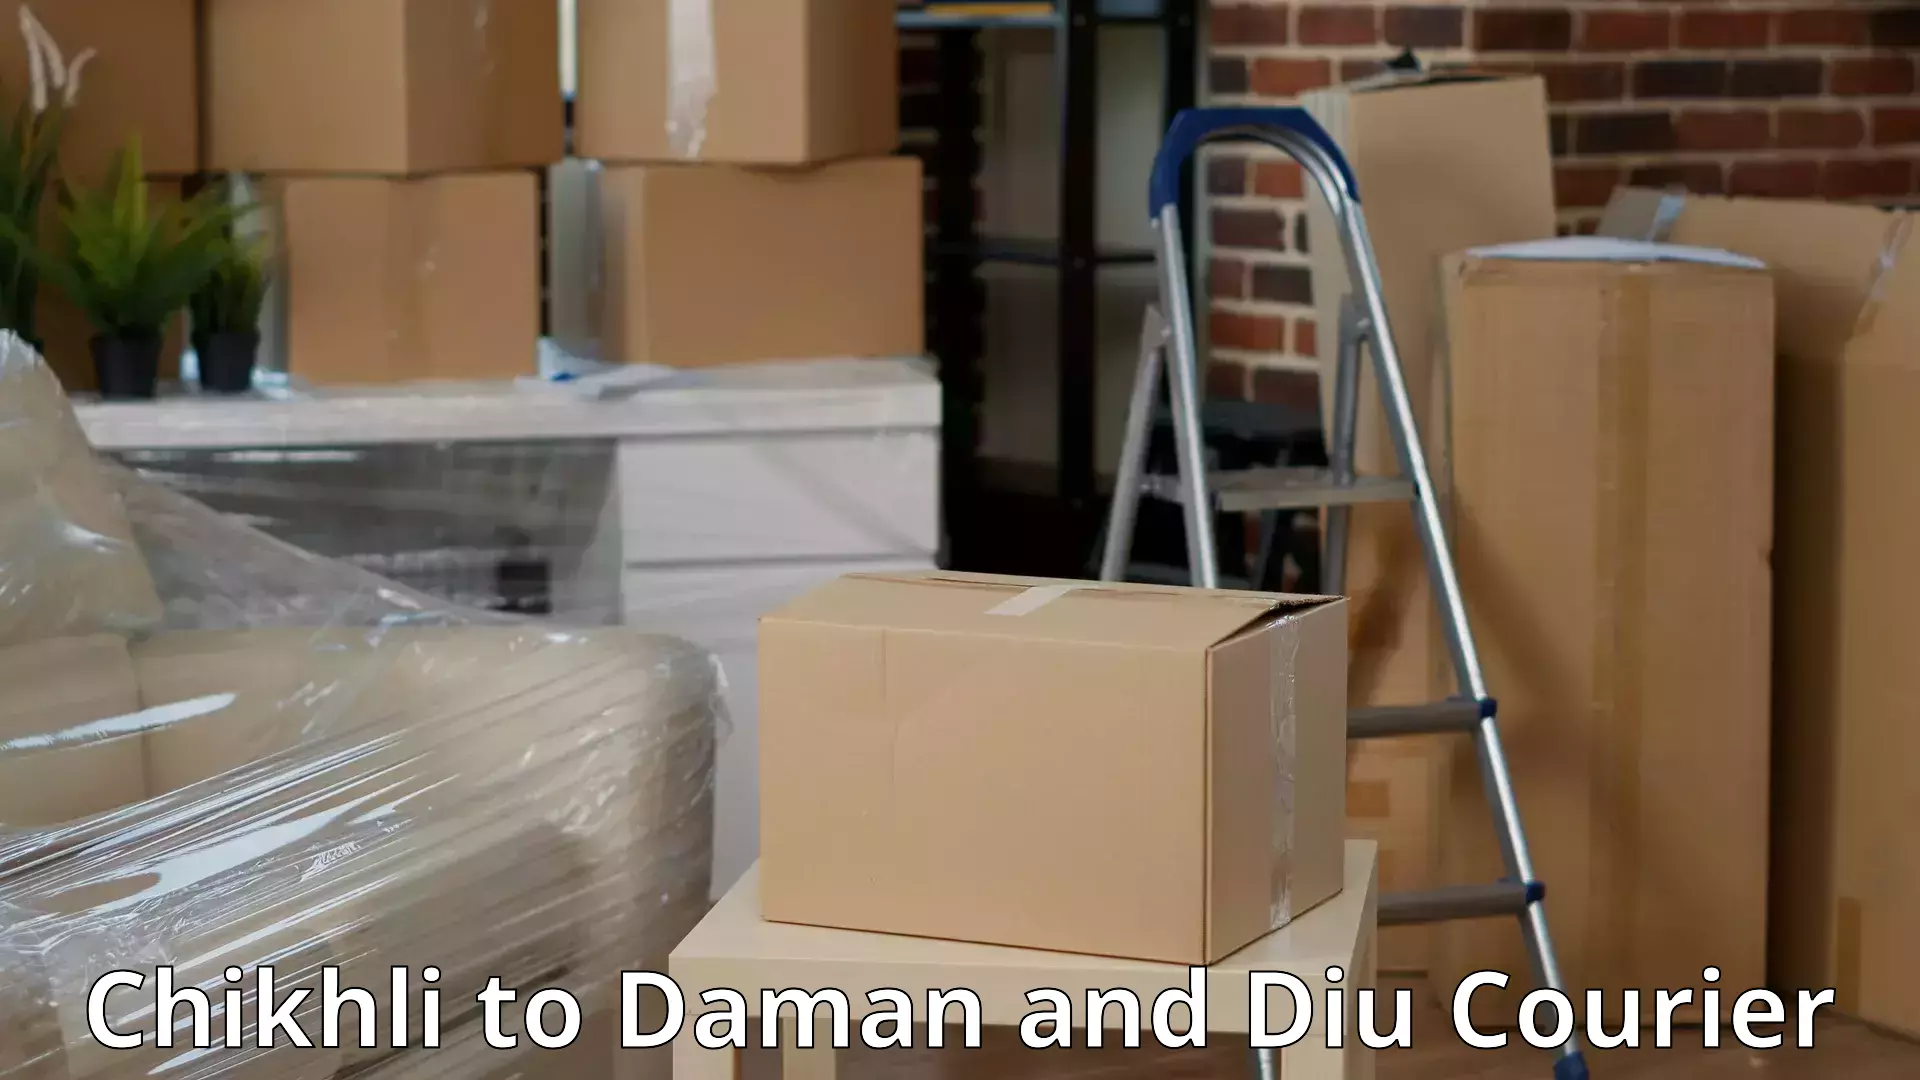 Home relocation experts Chikhli to Daman and Diu